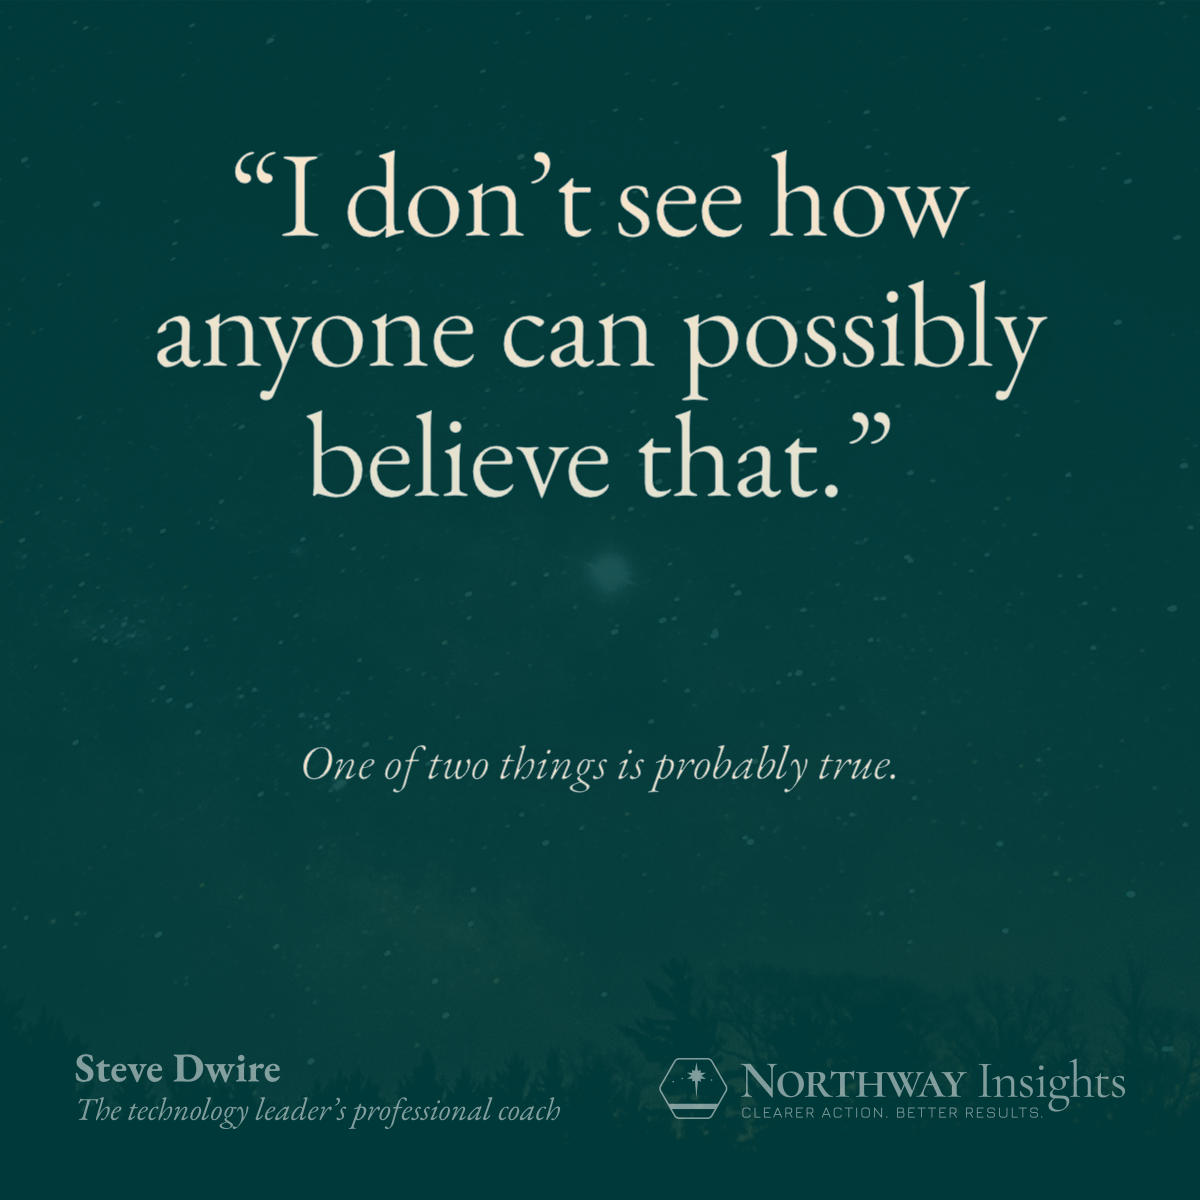 “I don’t see how anyone can possibly believe that.”